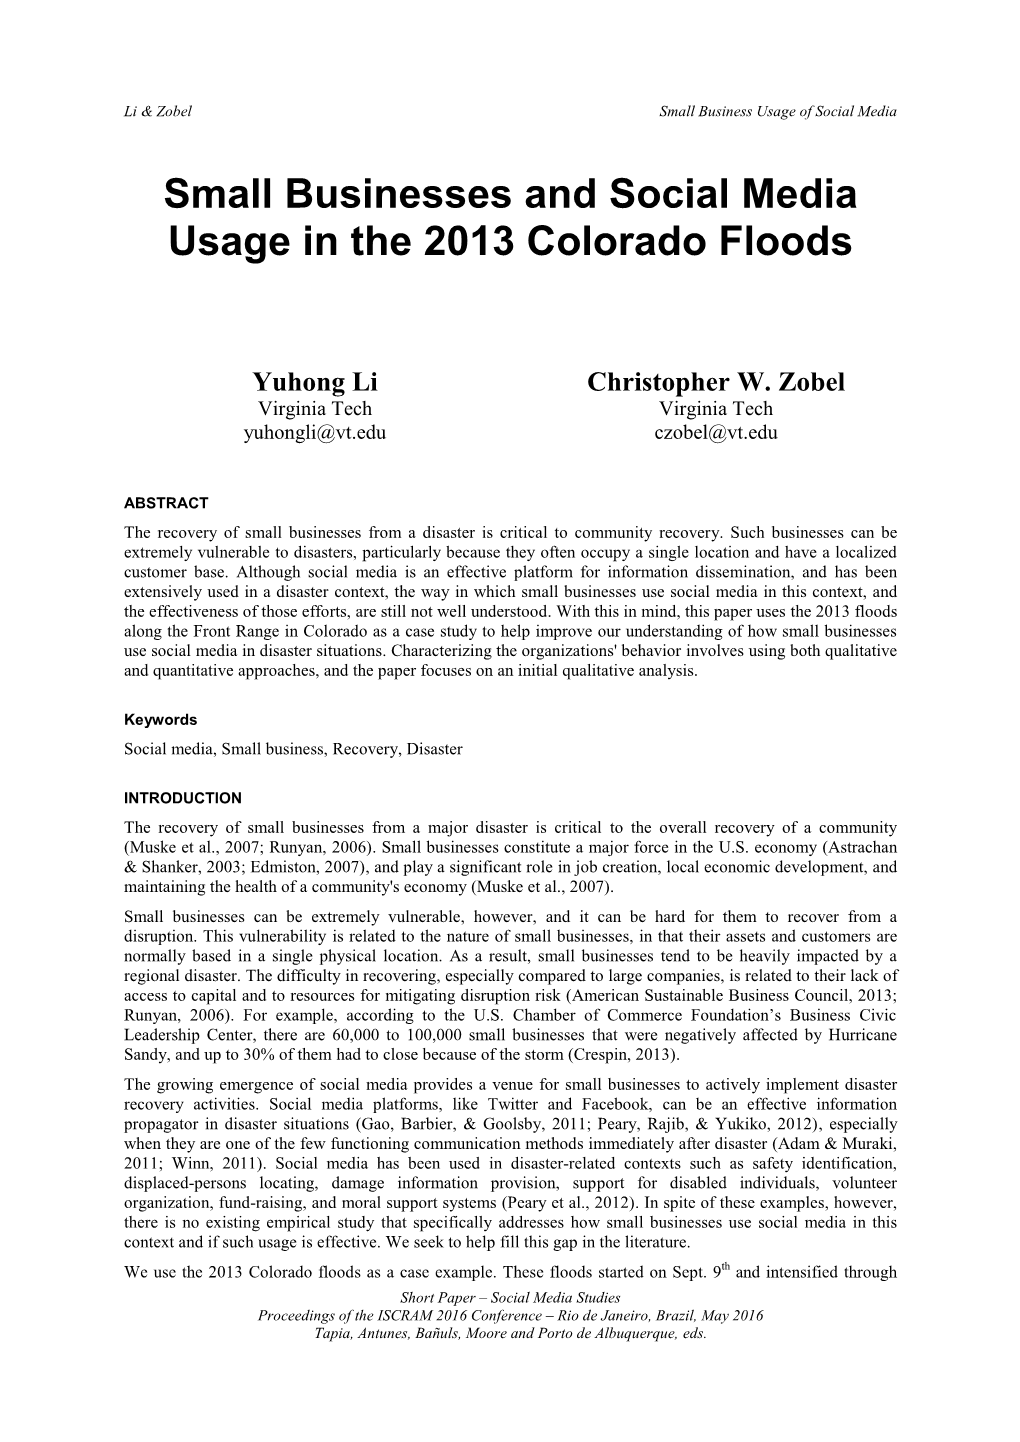 Small Businesses and Social Media Usage in the 2013 Colorado Floods